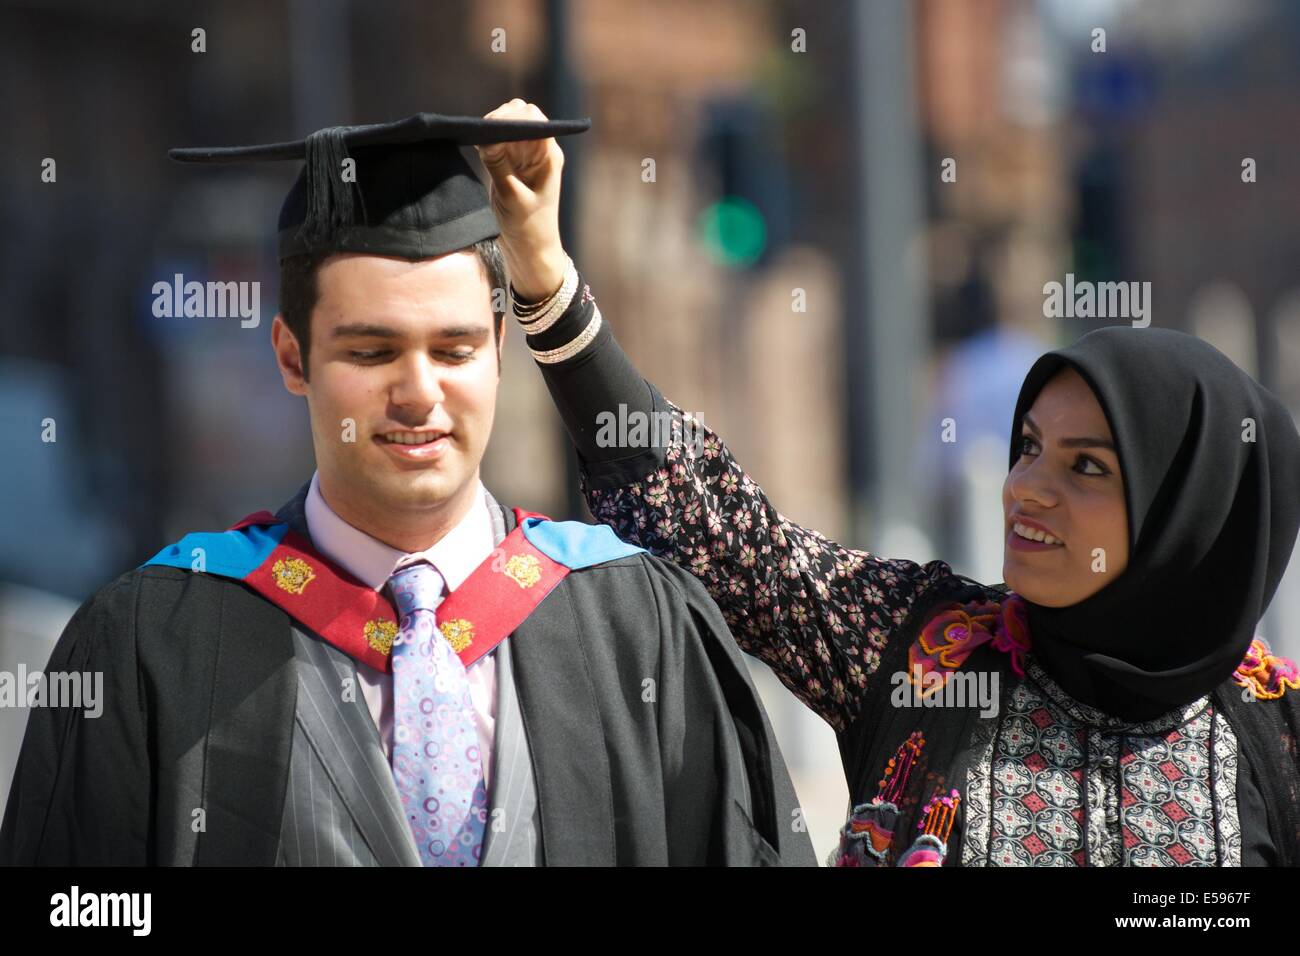 Manchester,  UK.  24th July, 2014. Mohammed Adel has his mortar board adjusted before entering The Bridgewater Hall to receive his B.Sc. in Business Information Technology, which he gained with First Class Honours. Graduation (Manchester Metropolitan University) Manchester, UK Credit:  John Fryer/Alamy Live News Stock Photo